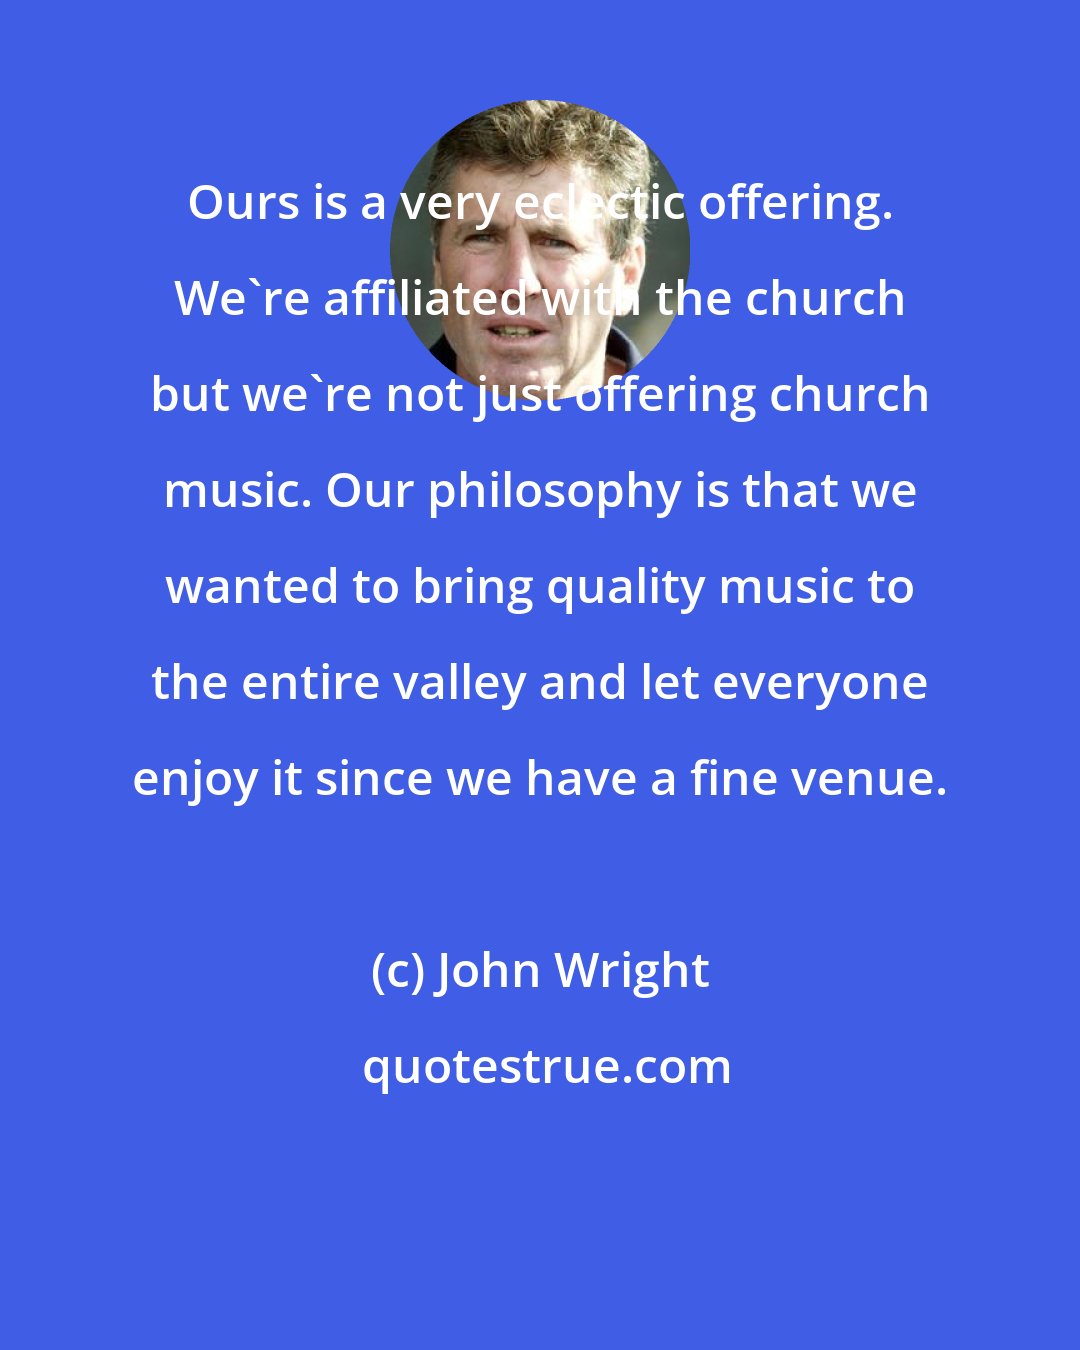 John Wright: Ours is a very eclectic offering. We're affiliated with the church but we're not just offering church music. Our philosophy is that we wanted to bring quality music to the entire valley and let everyone enjoy it since we have a fine venue.